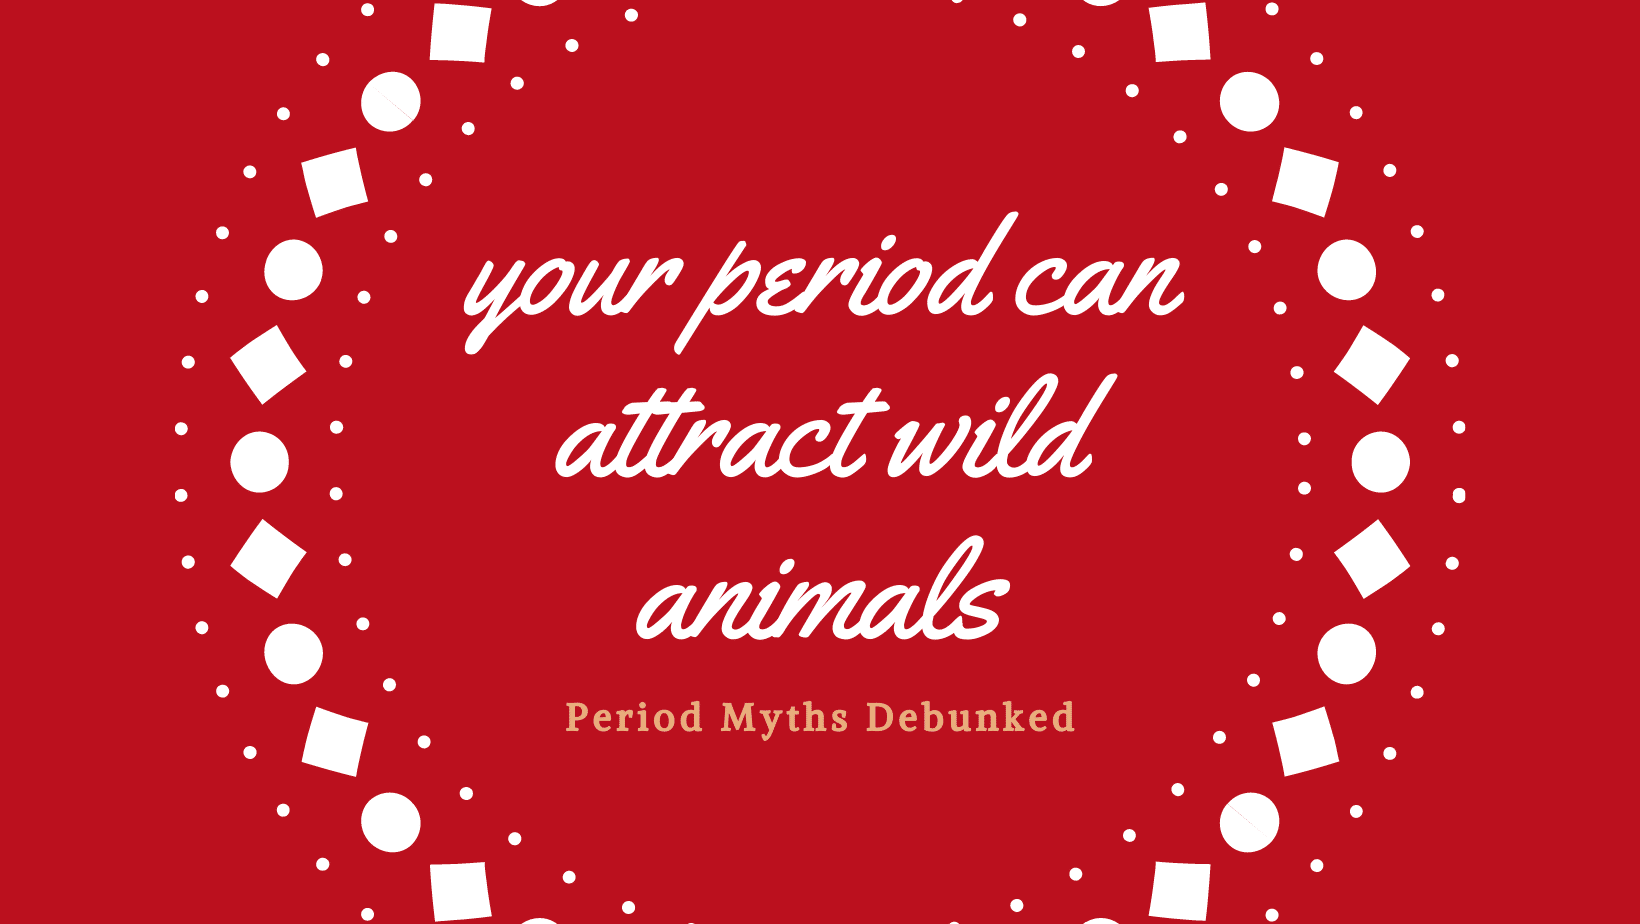 Graphic about debunking period myths that your period can attract wild animals.